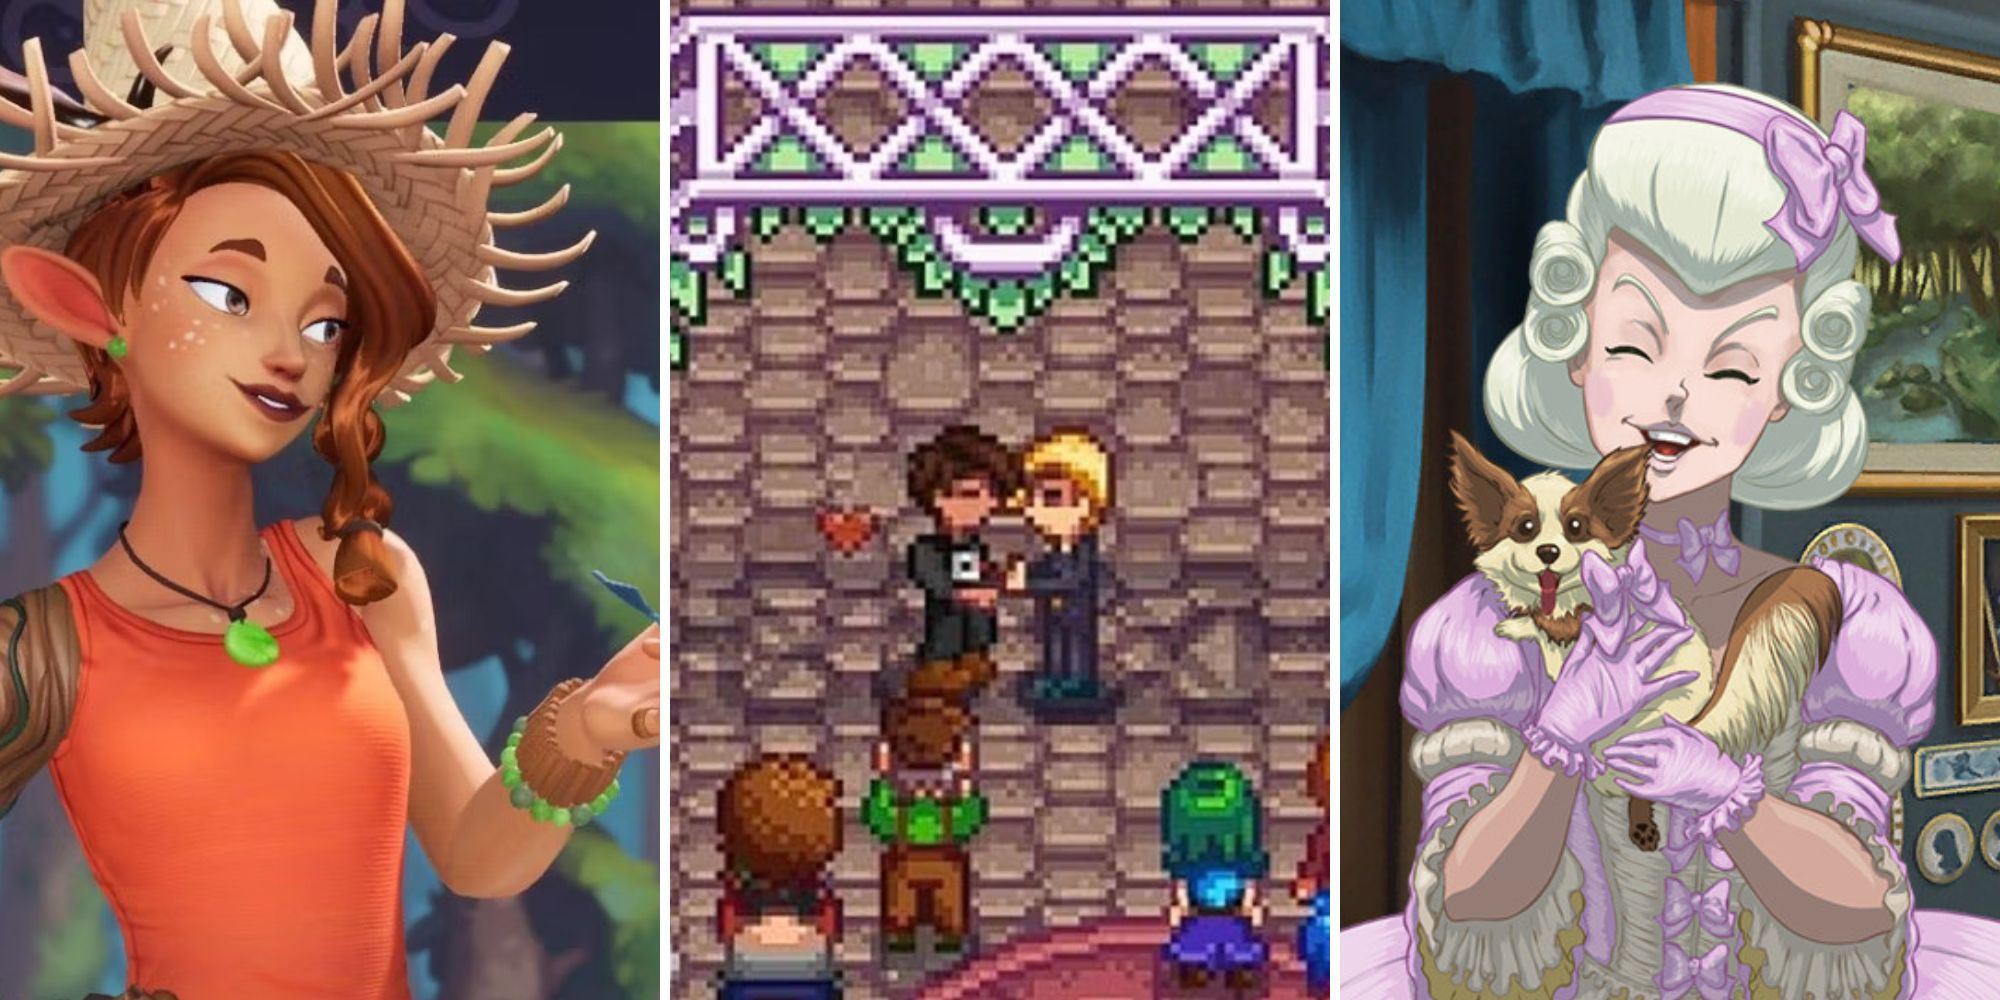 A grid showing characters from the games Potionomics, Stardew Valley, and Ambition: A Minute In Power